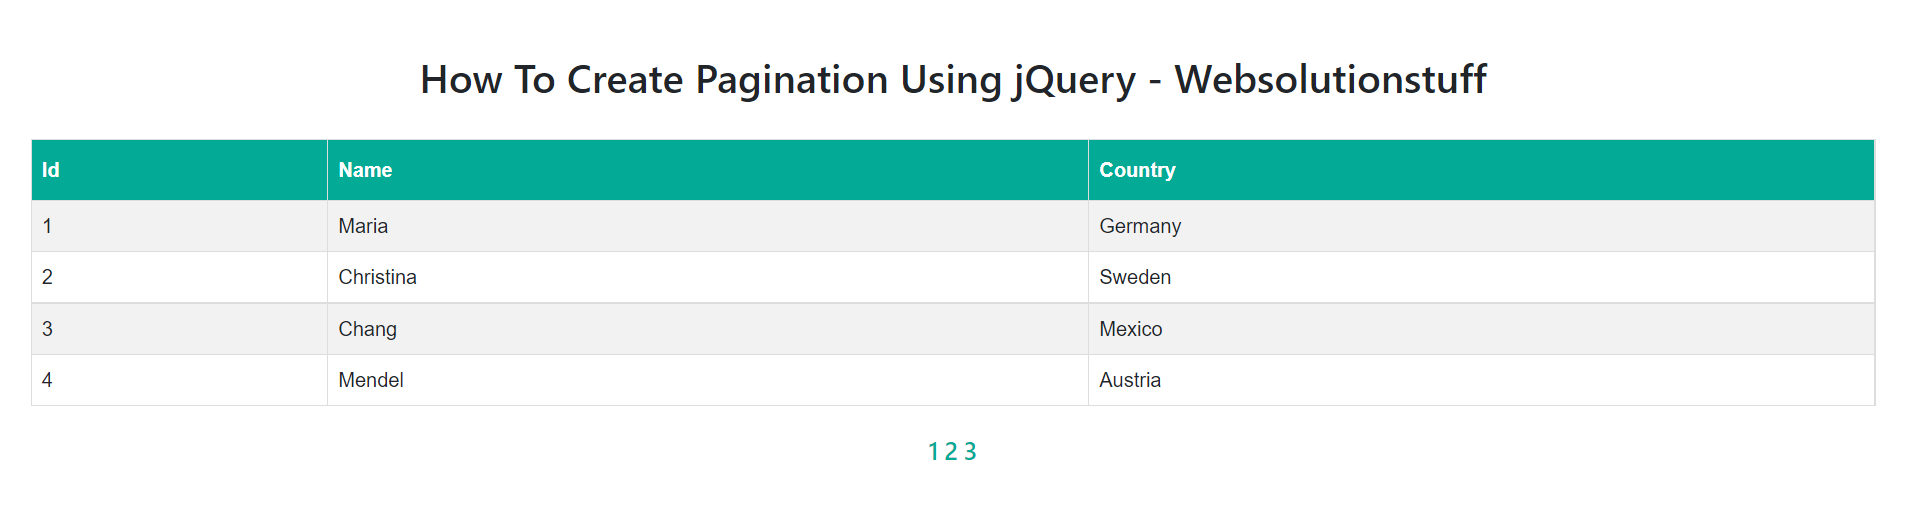 как_to_create_pagination_using_jquery_and_bootstrap